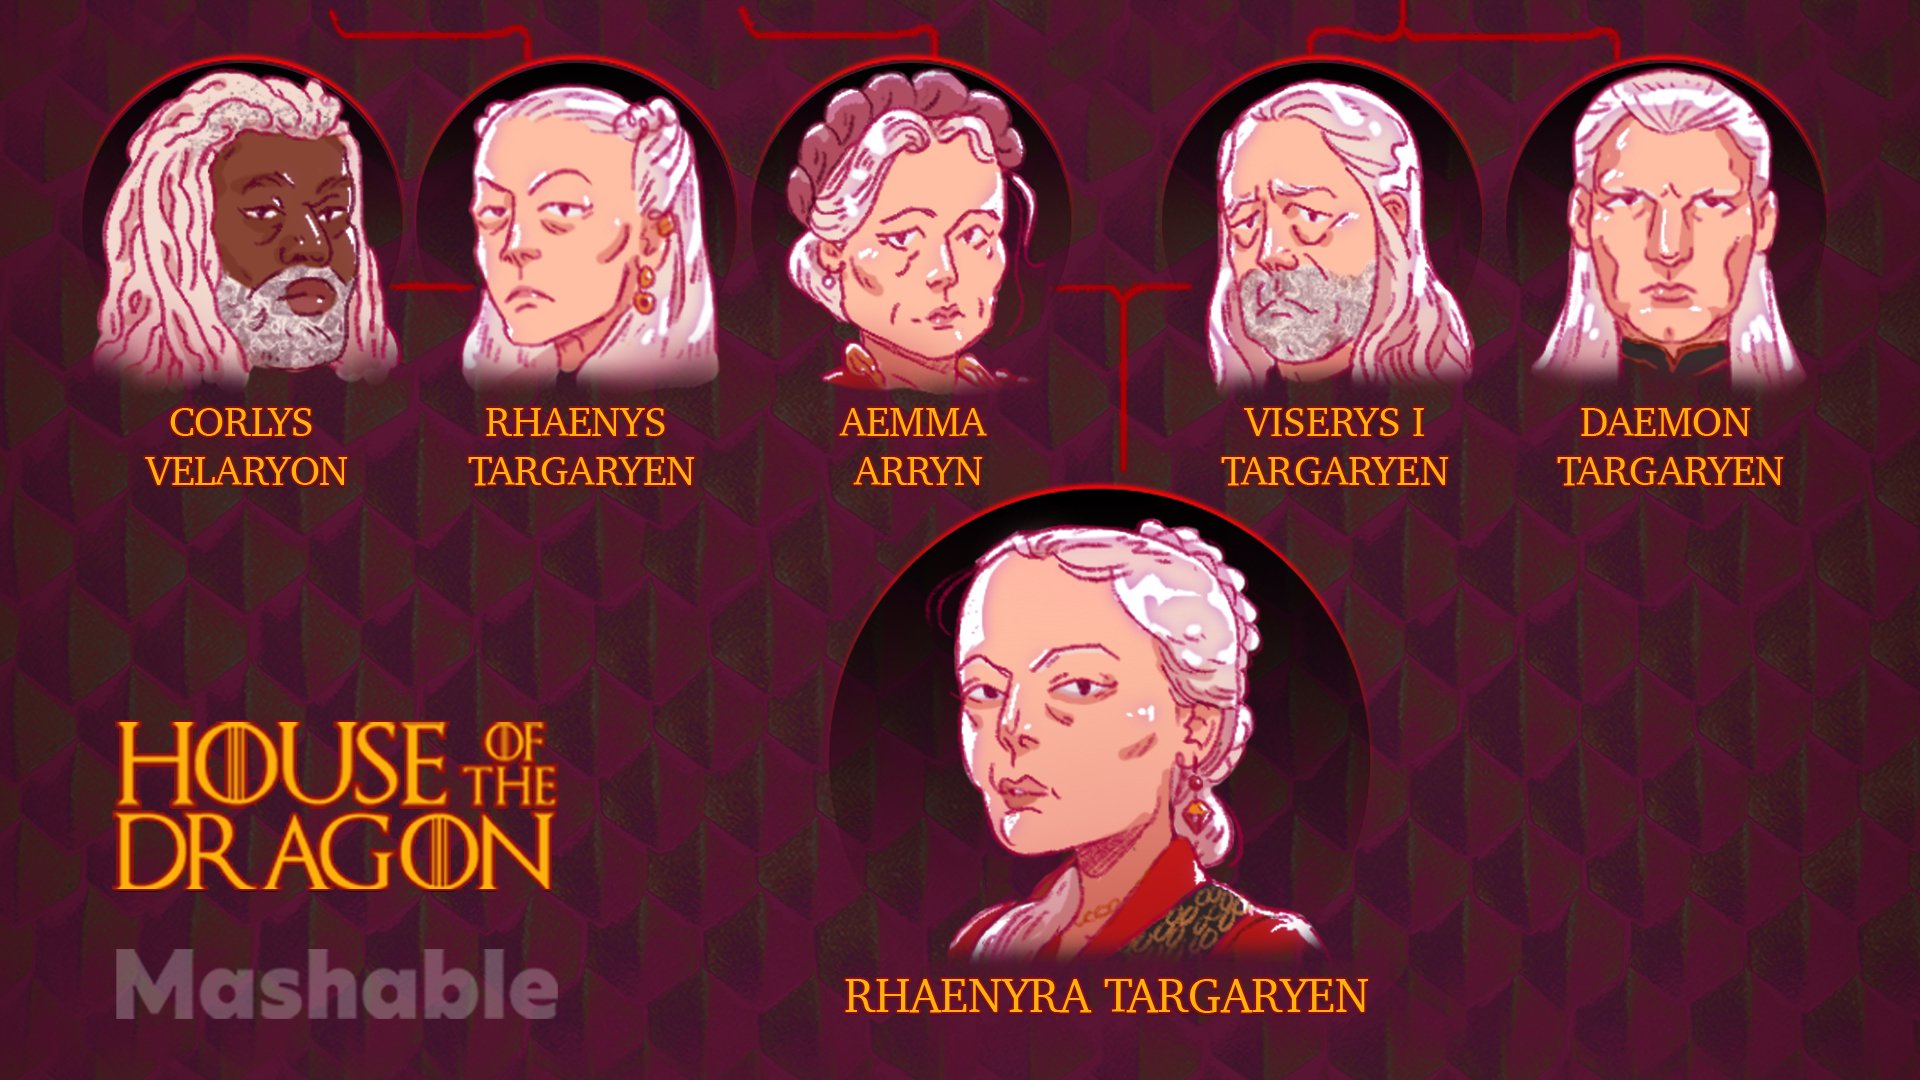 Whos who in House of the Dragon The Targaryen family tree